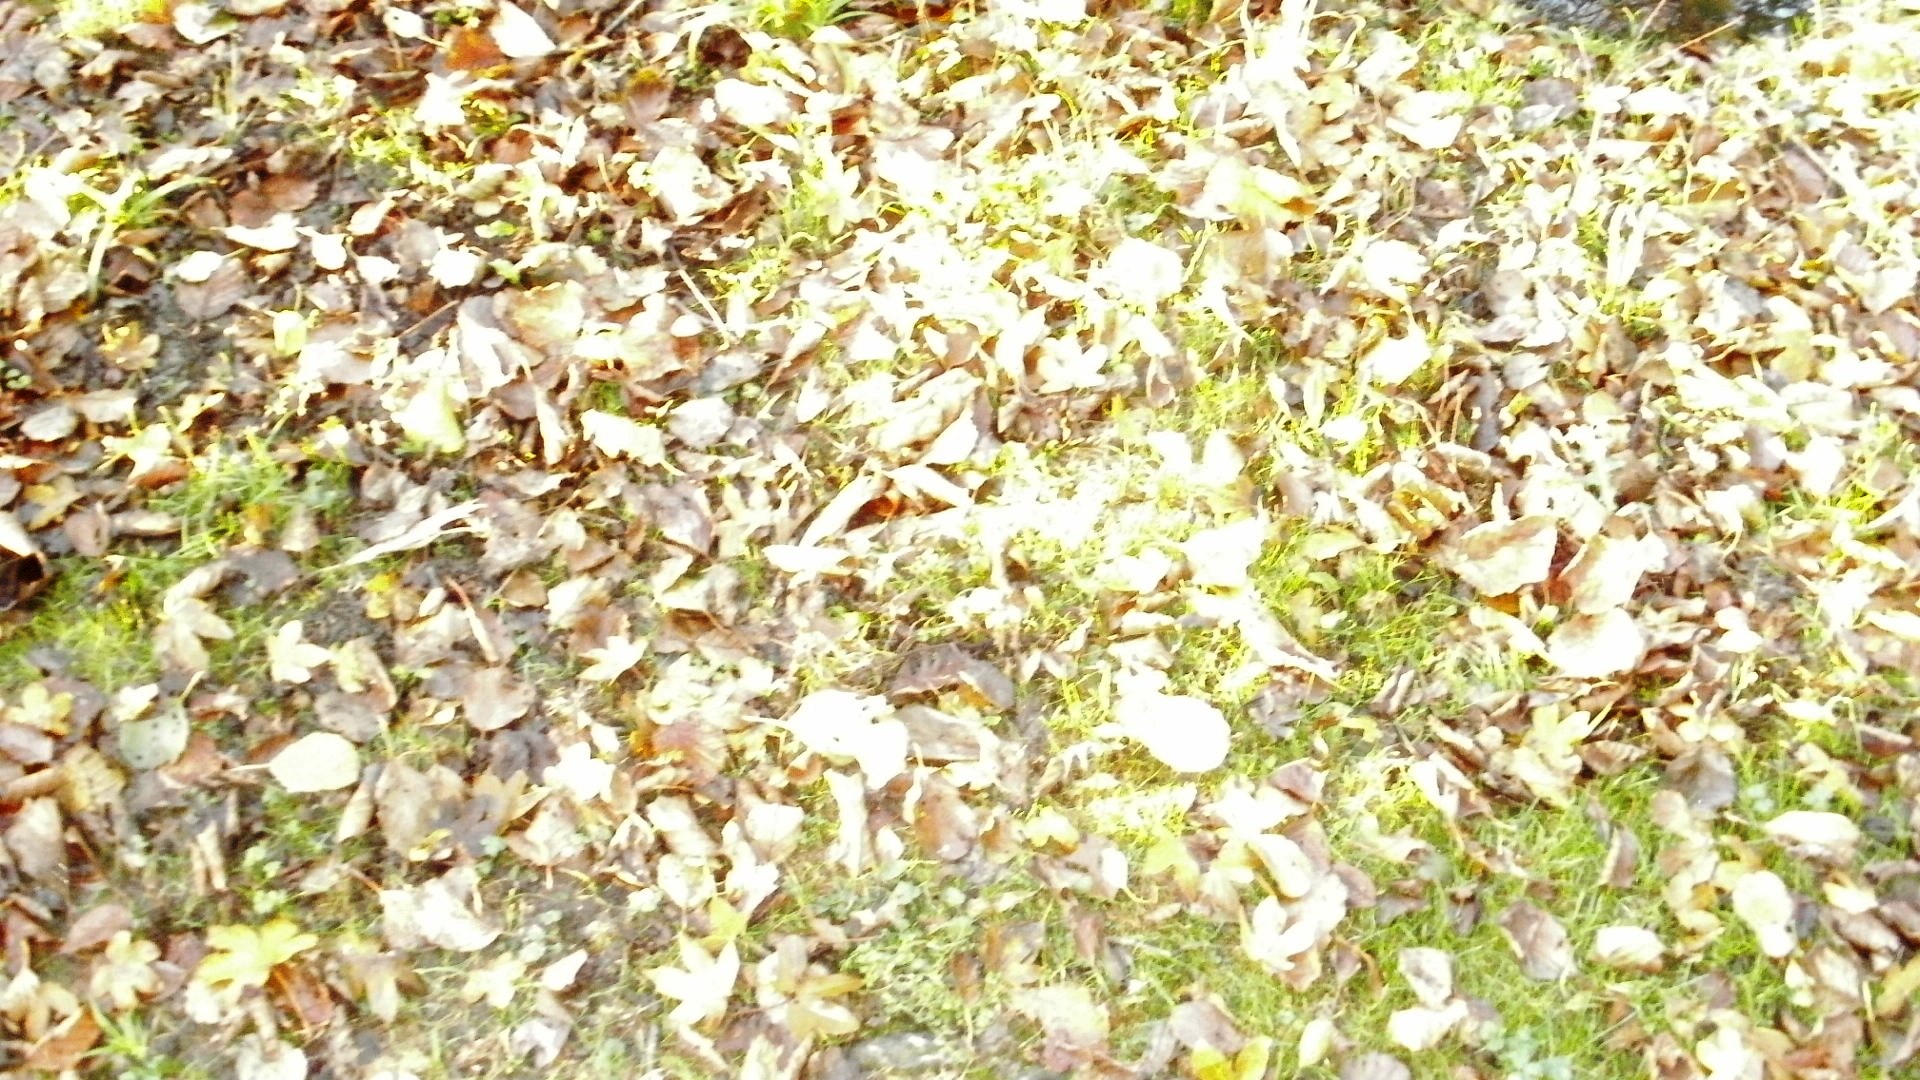 a dog lays on the ground among leaves